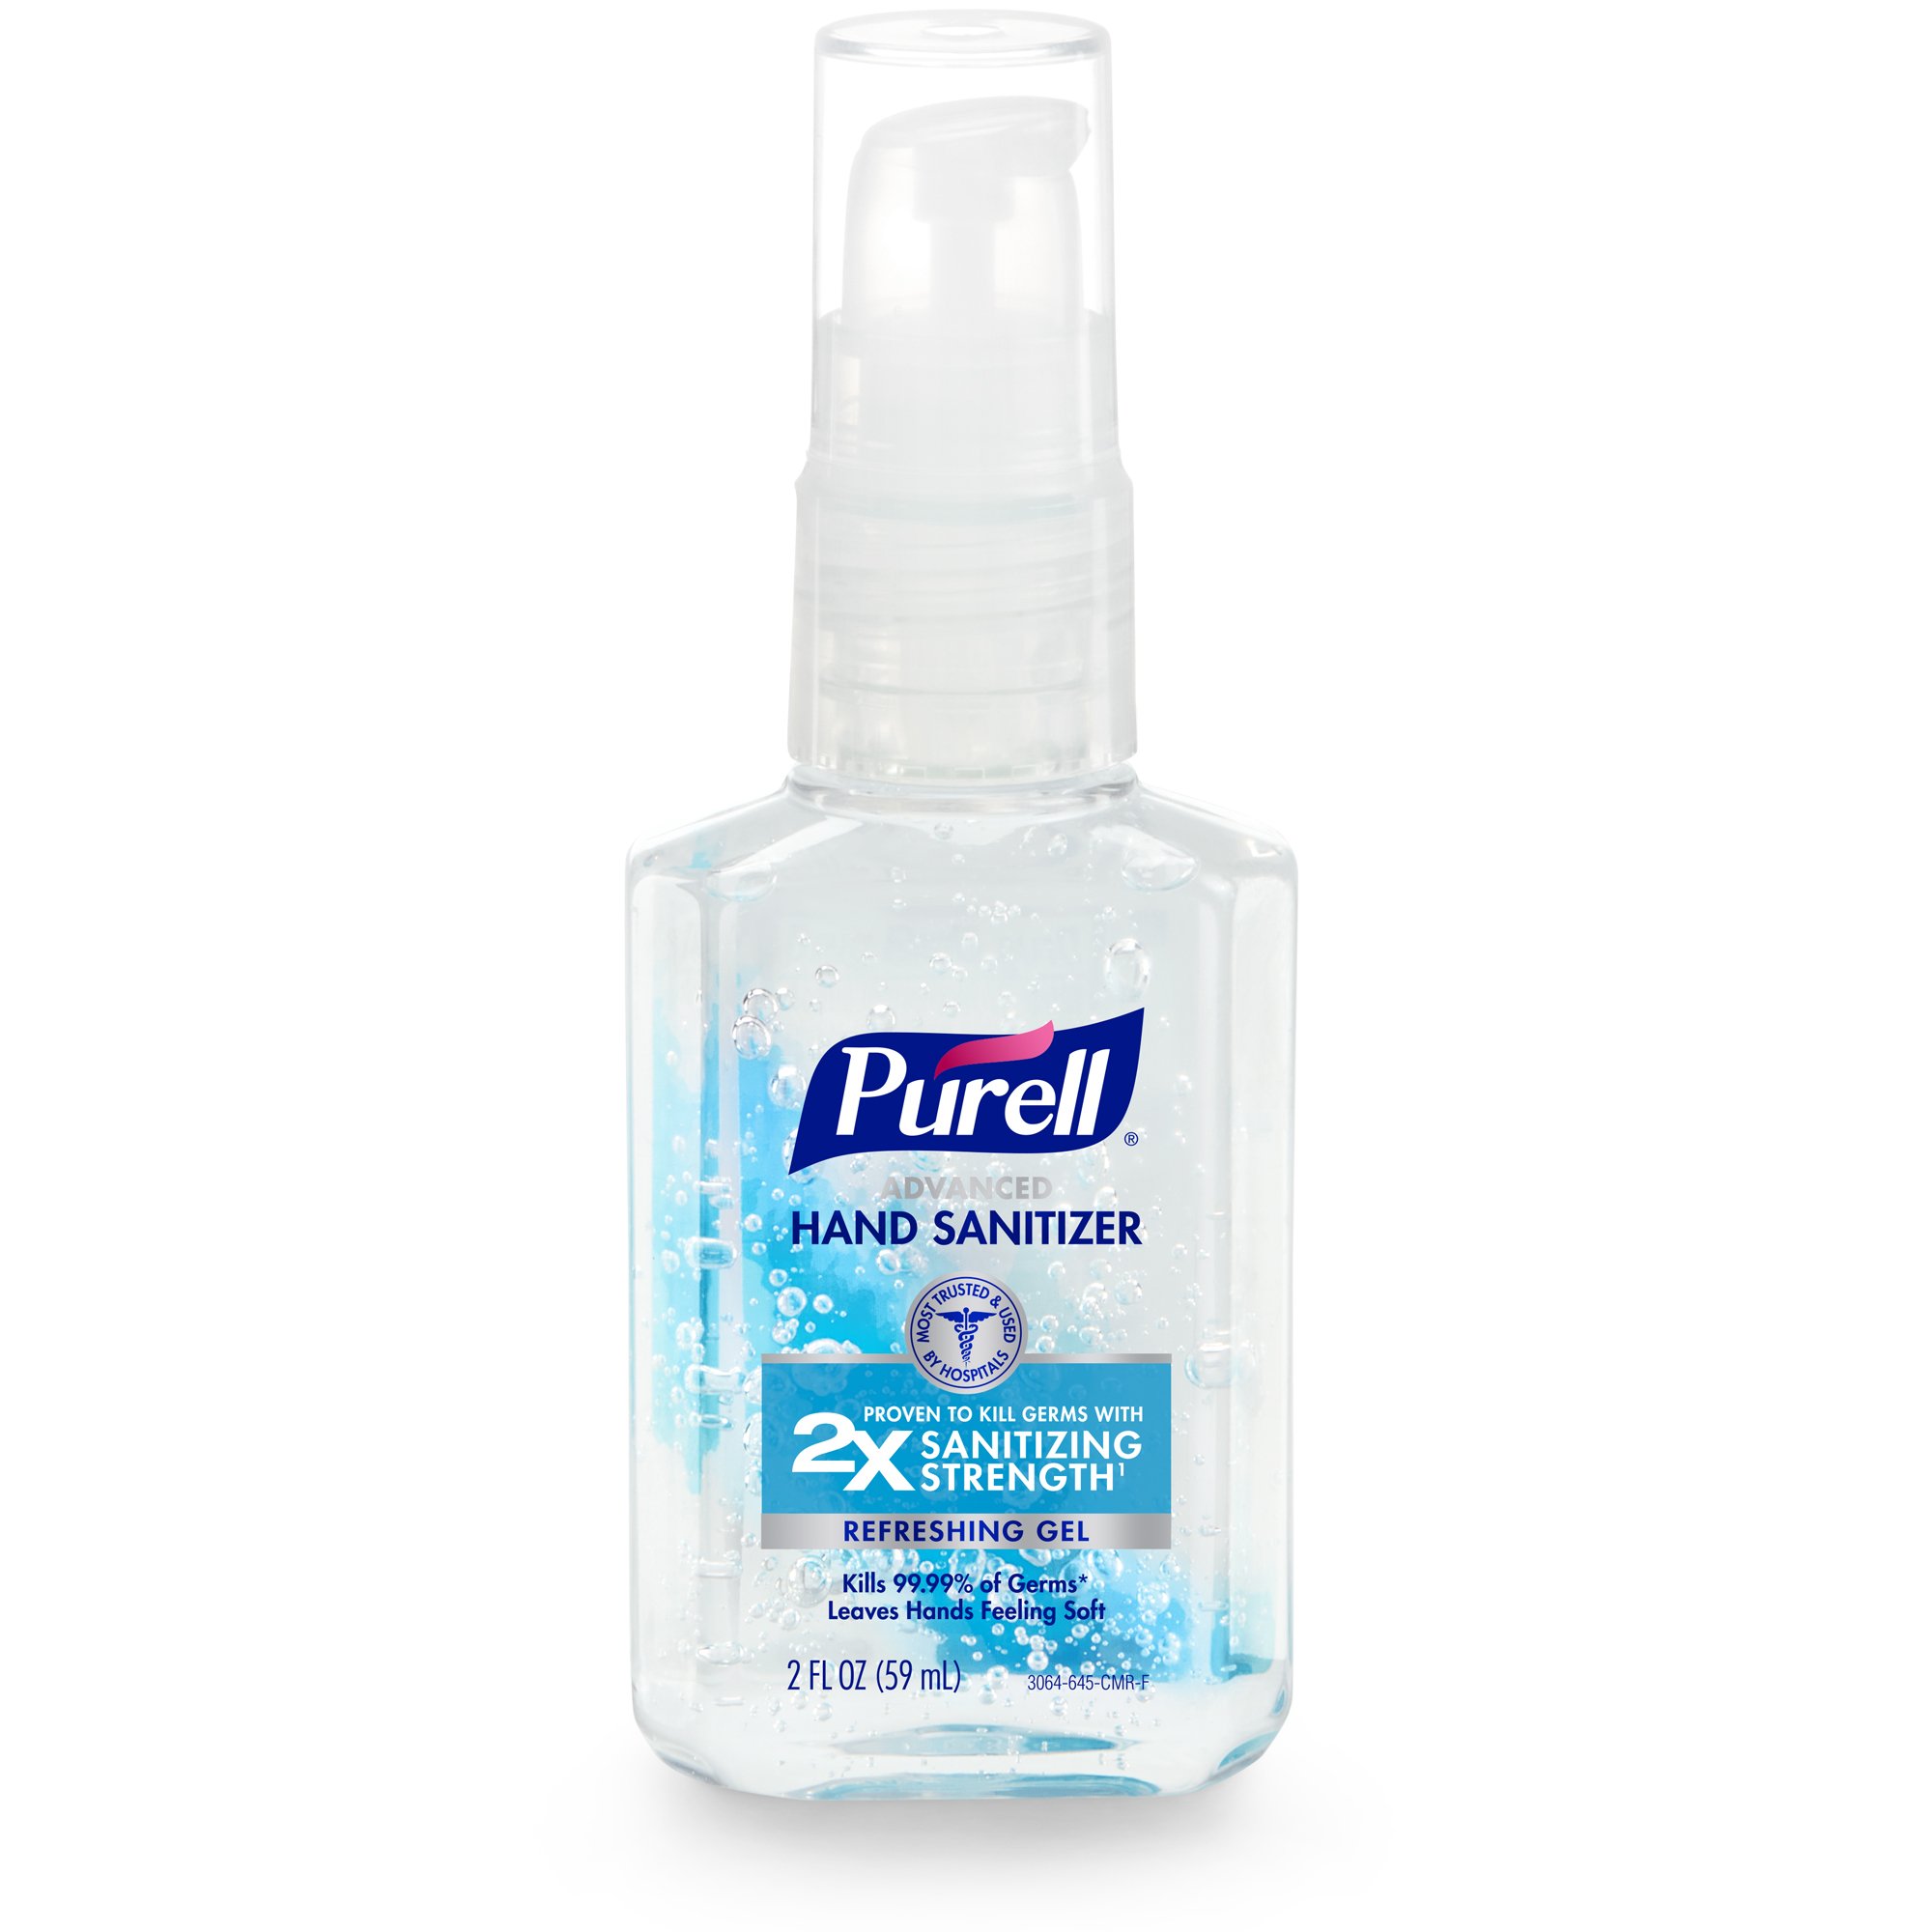 Purell Hand Sanitizer Original Travel Size - Shop Cleansers & Soaps at